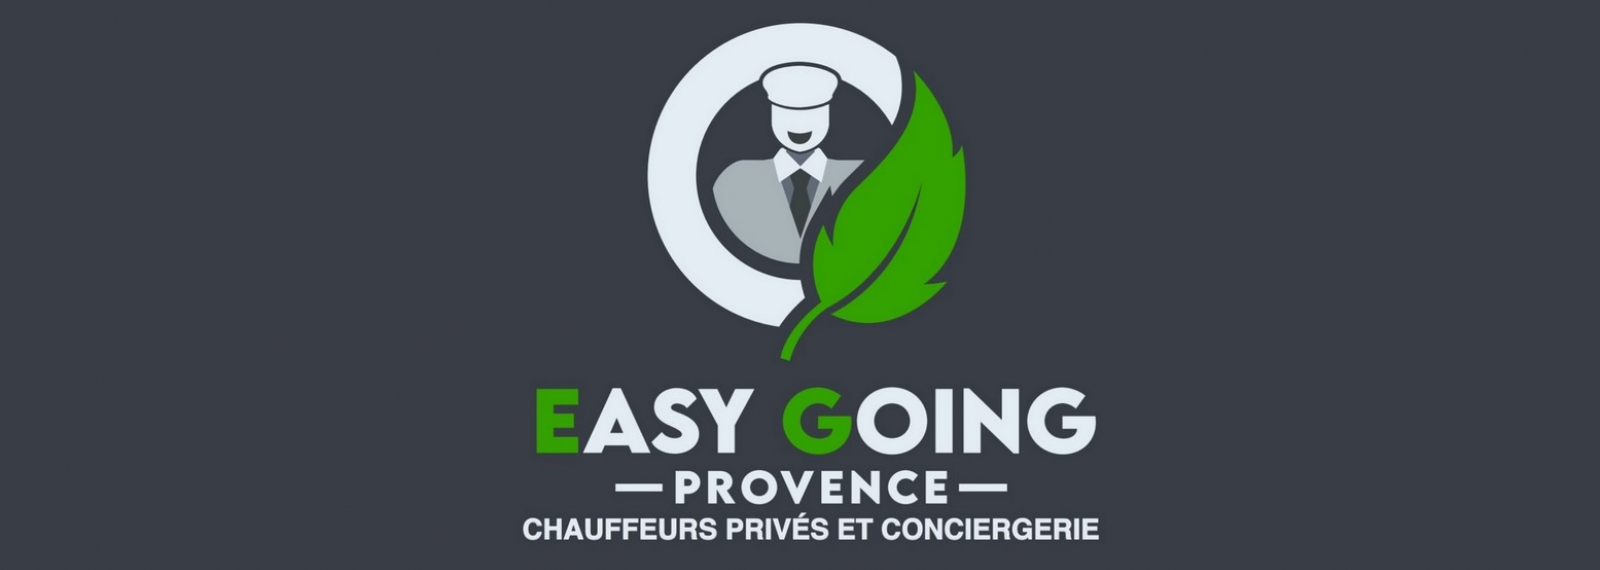 Chauffeur privé Easy Going Provence